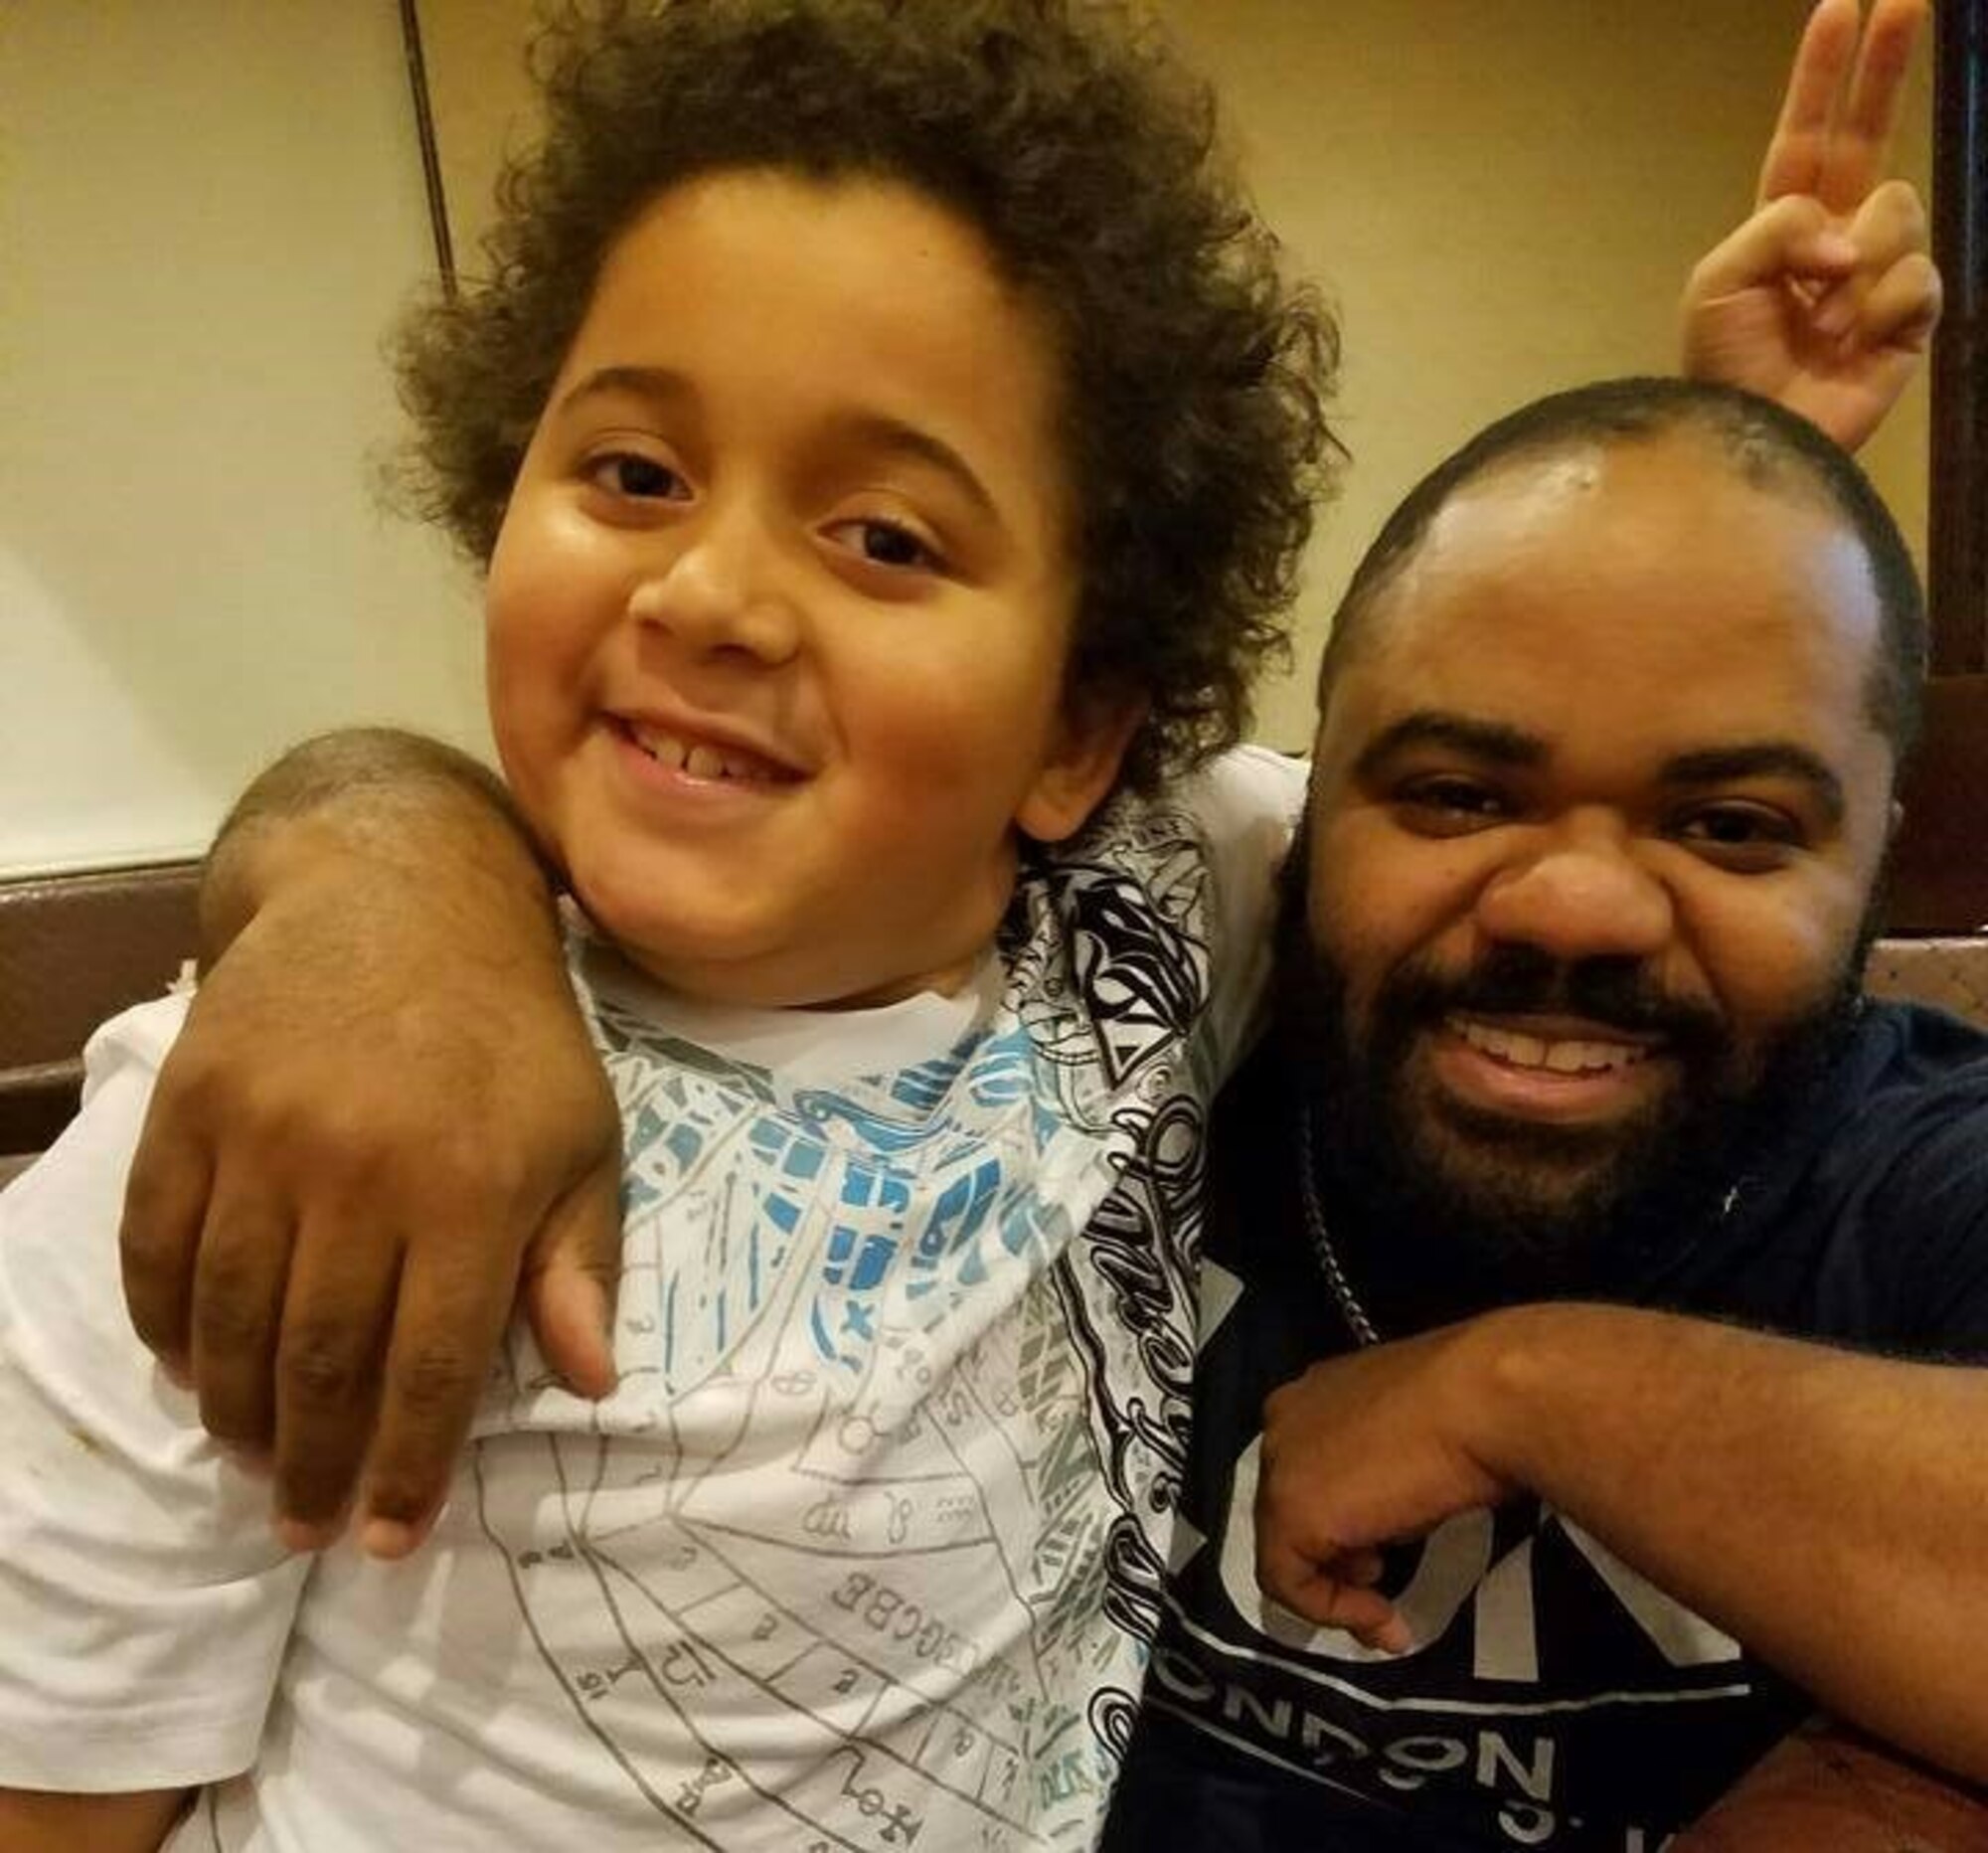 Richard Cooper, a marketing specialist with the Air Force Services Activity, is a father figure through his volunteerism with Big Brothers Big Sisters of San Antonio.